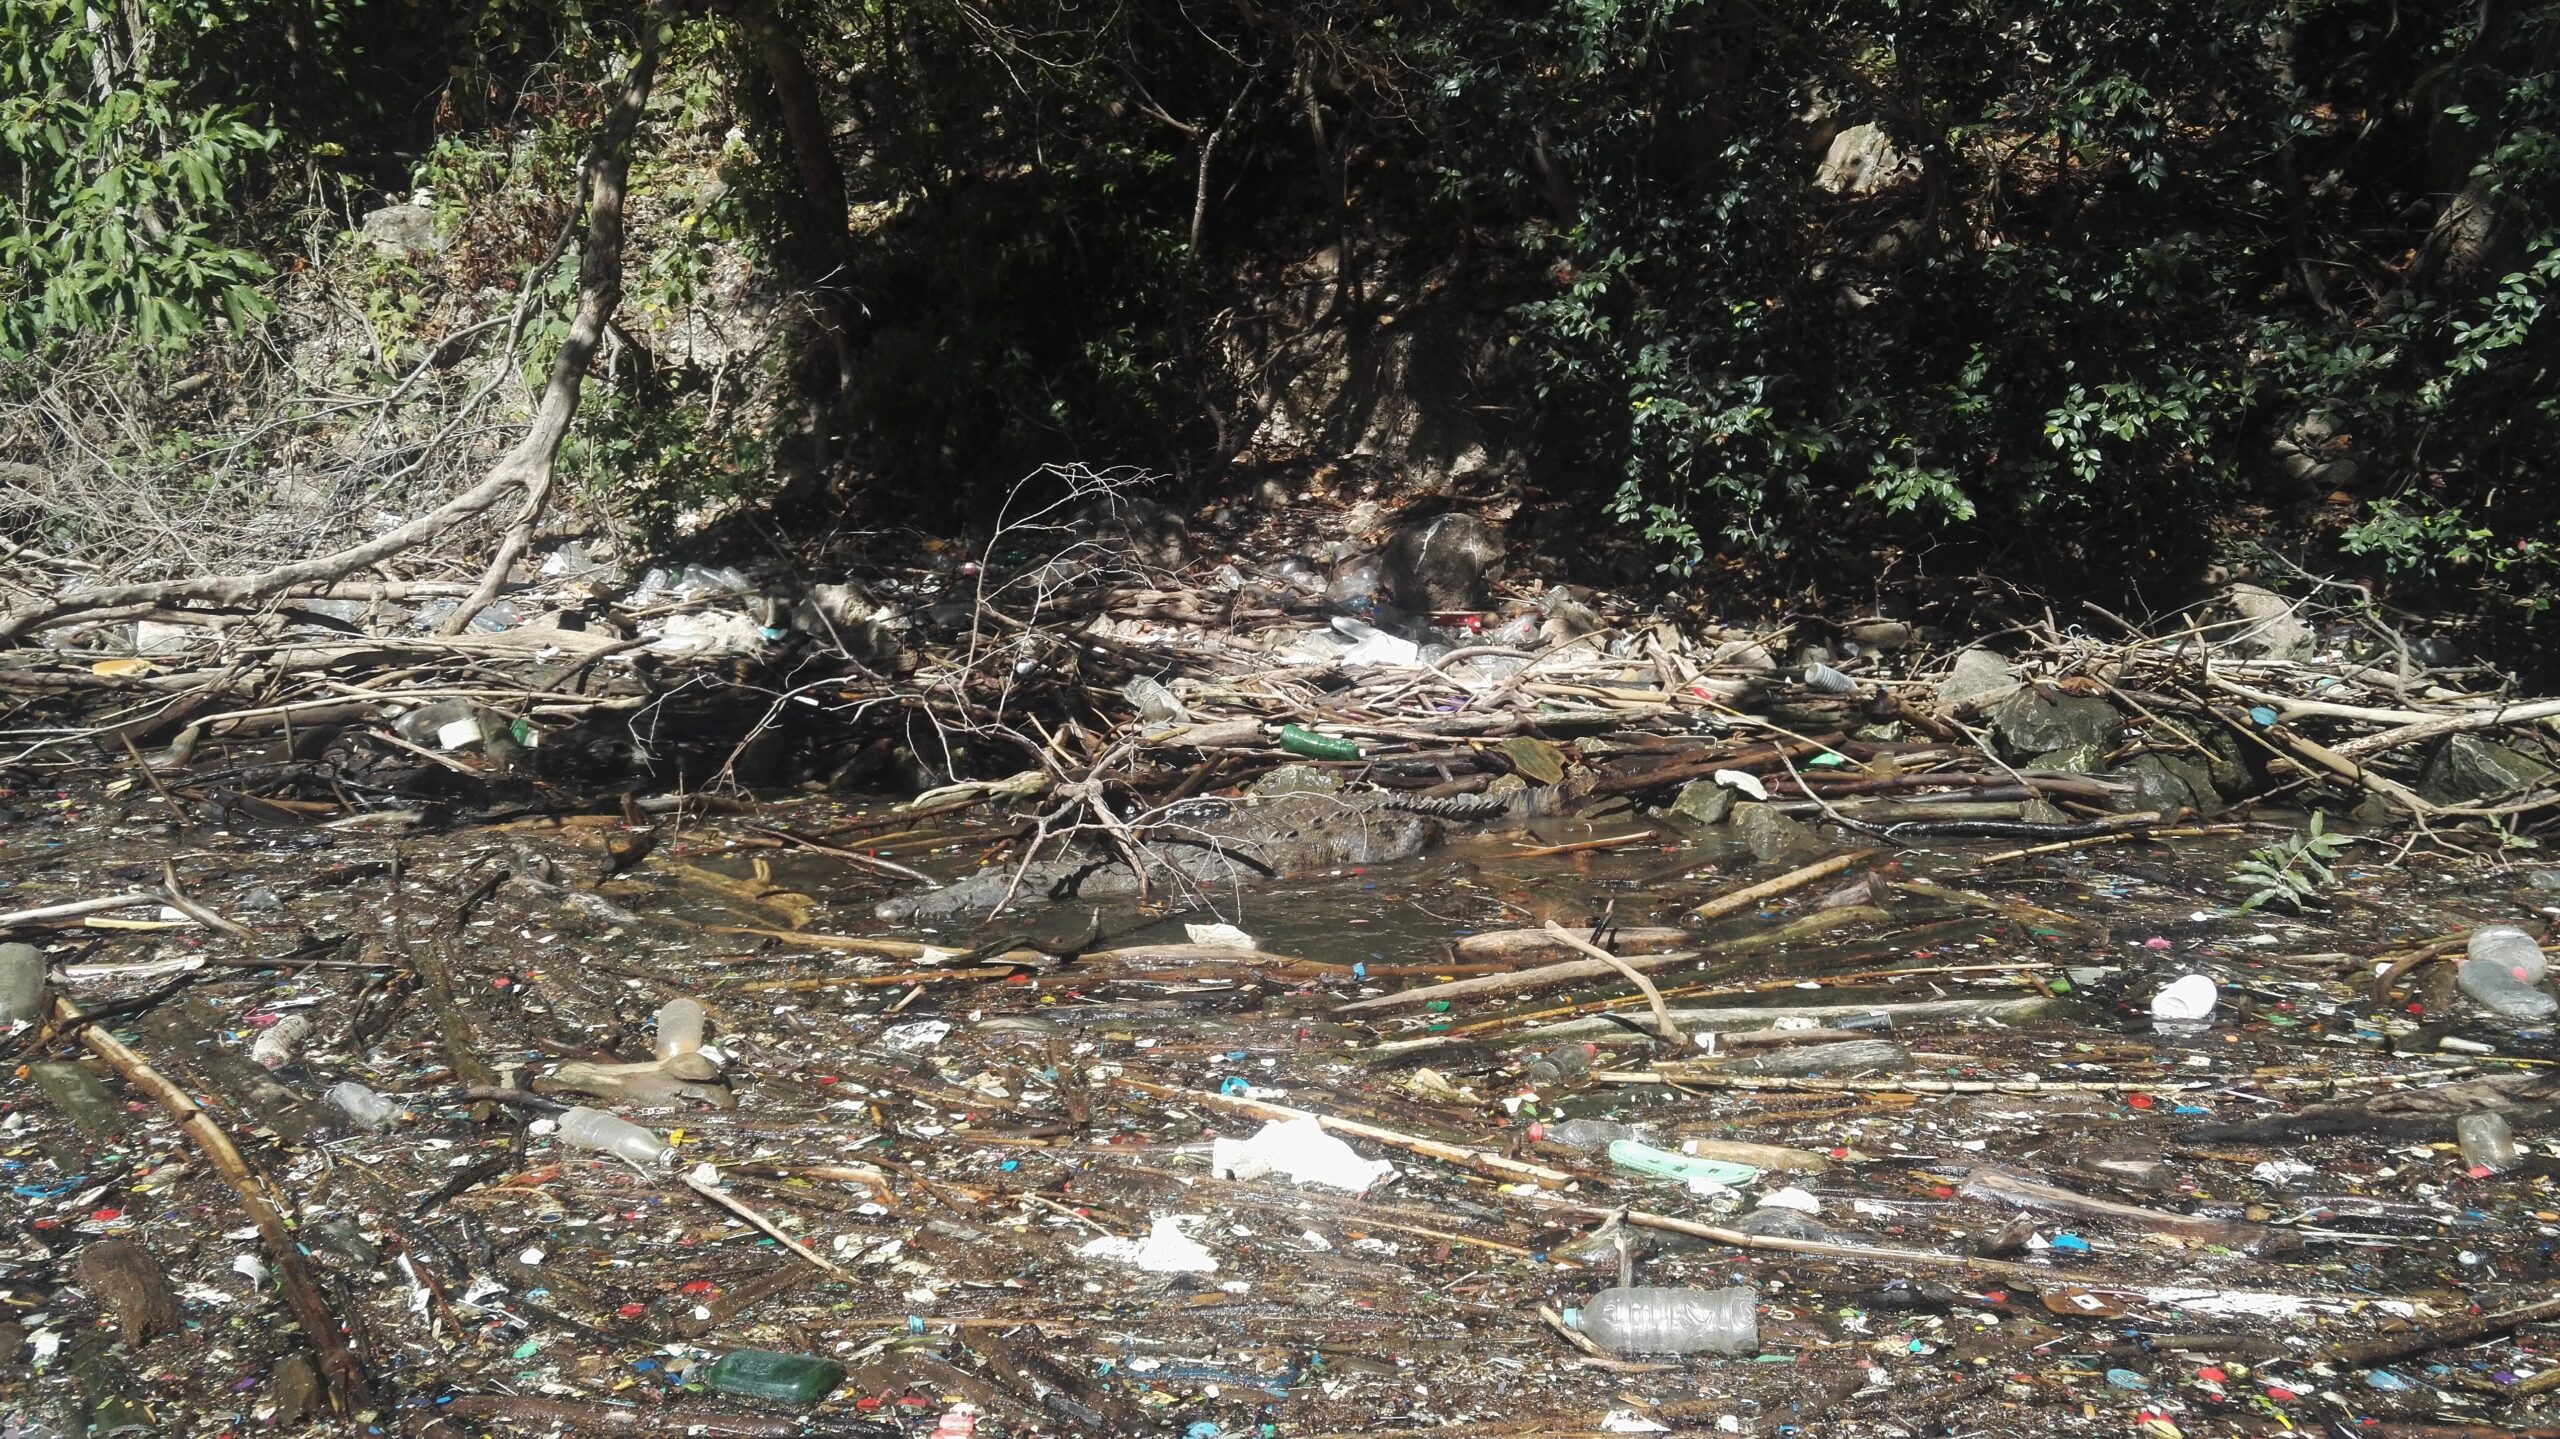 river curve with loads of collected plastic and trash, crocodile swimming amongst it